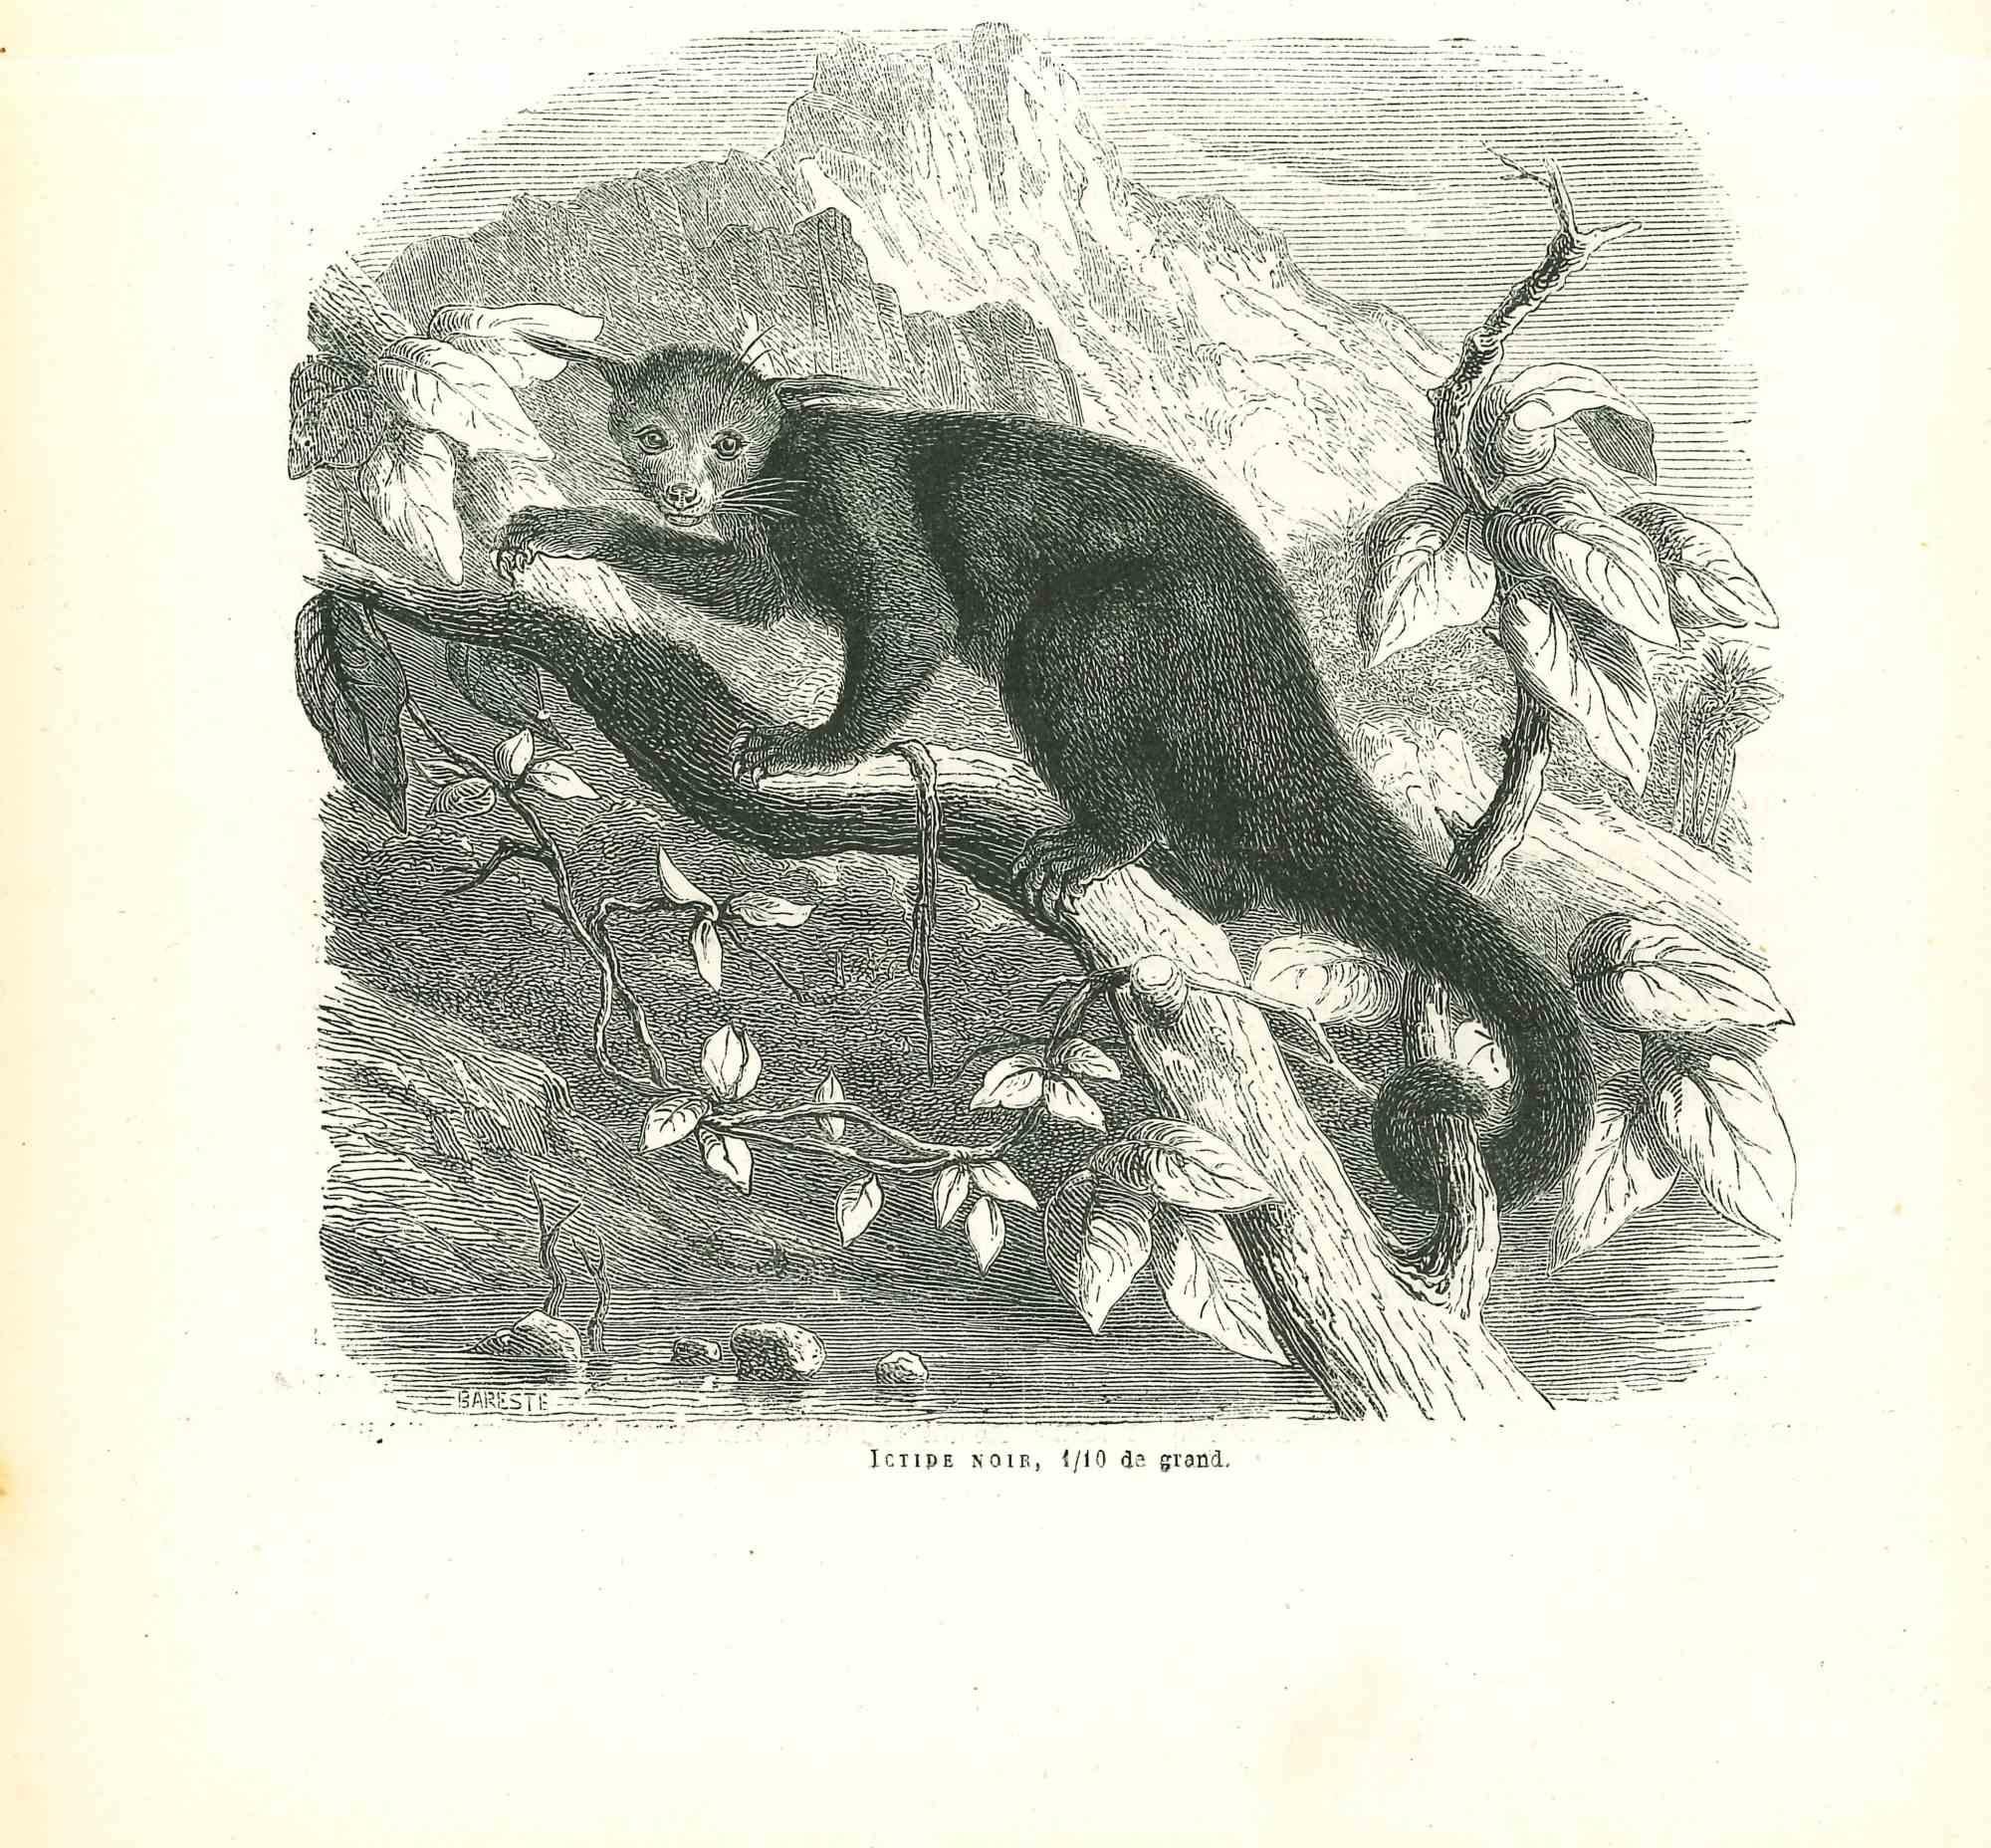 Ictide Noir is an original lithograph on ivory-colored paper, realized by Paul Gervais (1816-1879). The artwork is from The Series of "Les Trois Règnes de la Nature", and was published in 1854.

Good conditions.

Titled on the lower. With the notes